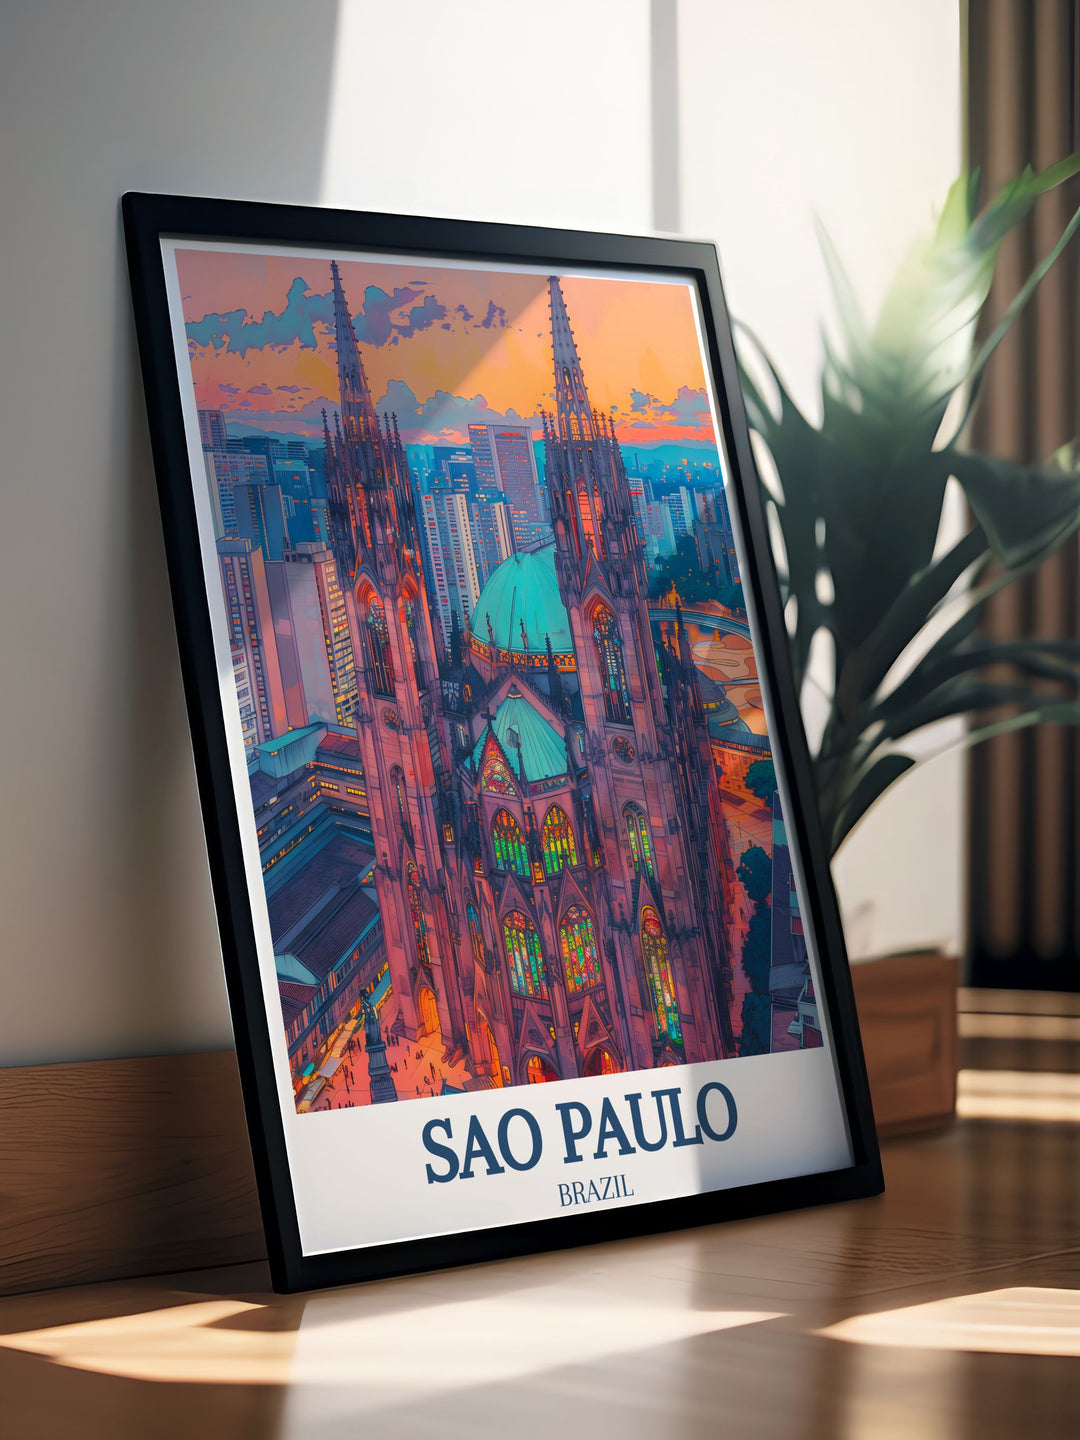 Vibrant poster of Praça da Sé square in Sao Paulo, highlighting the dynamic energy, shops, cafes, and cultural landmarks of this historic urban hub.